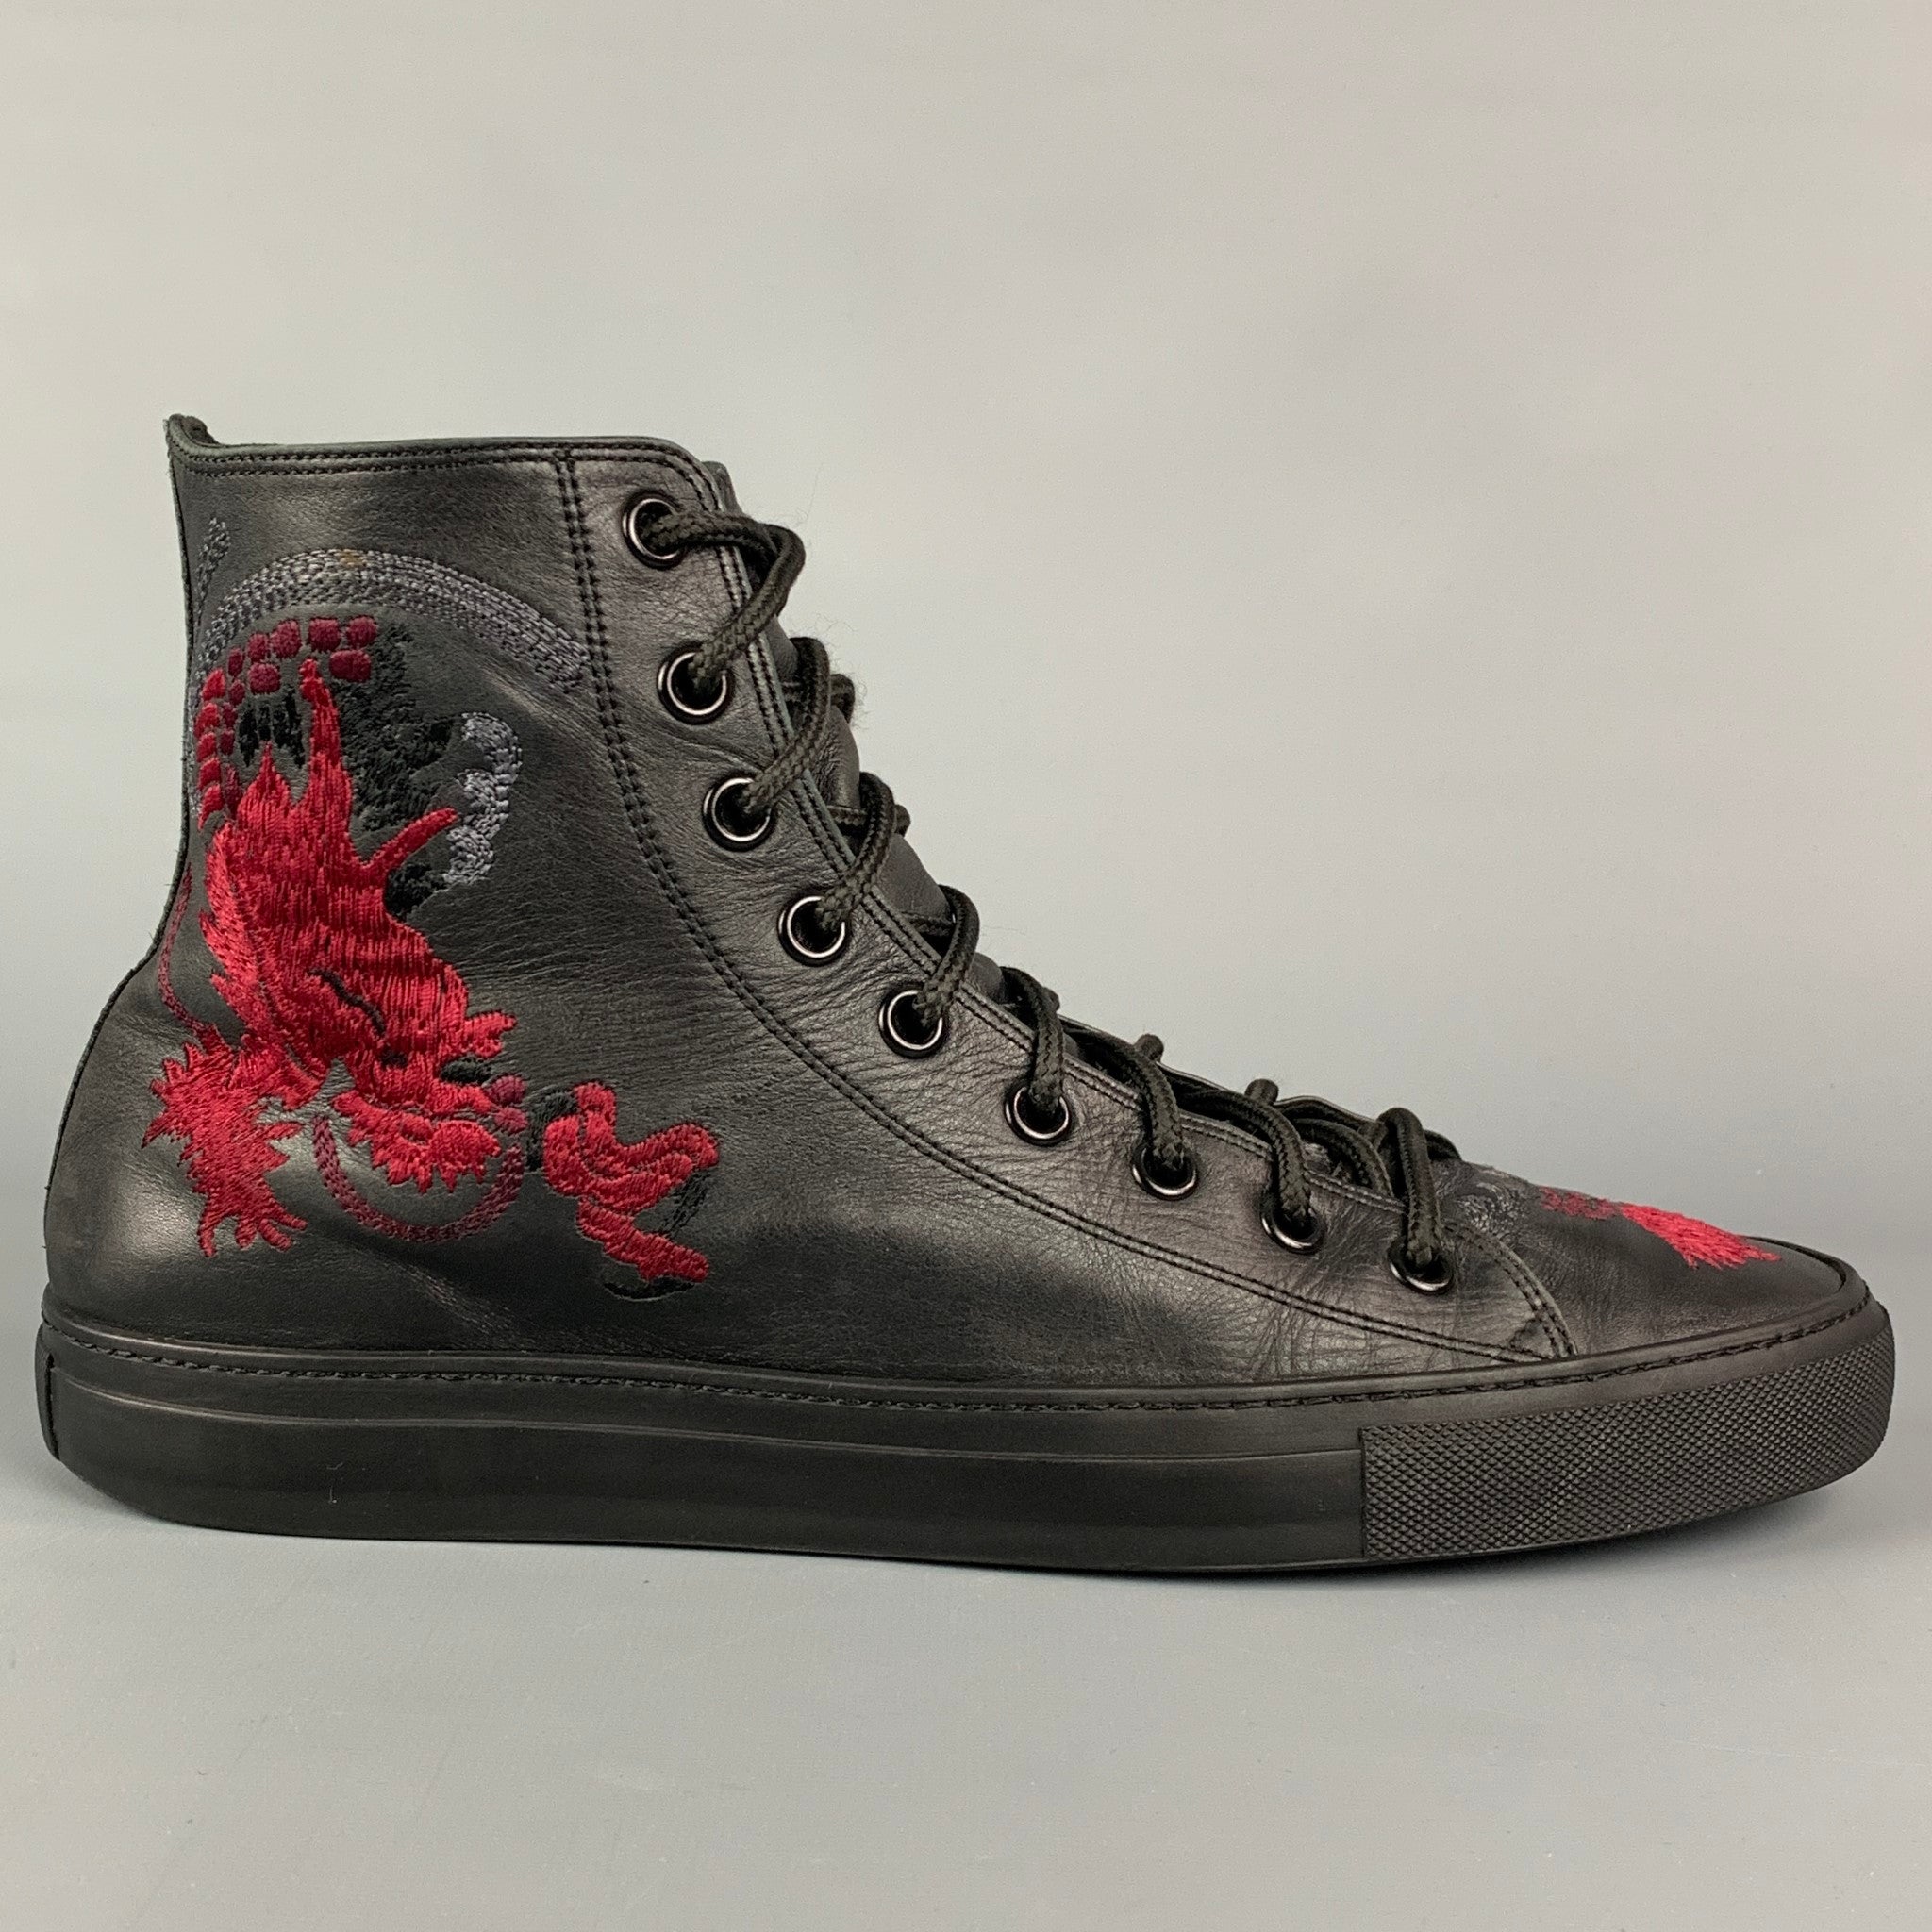 Invitere Recept Pickering GUCCI by TOM FORD SS 2001 Size Black Red Dragon Print Leather High Top  Sneakers – Sui Generis Designer Consignment